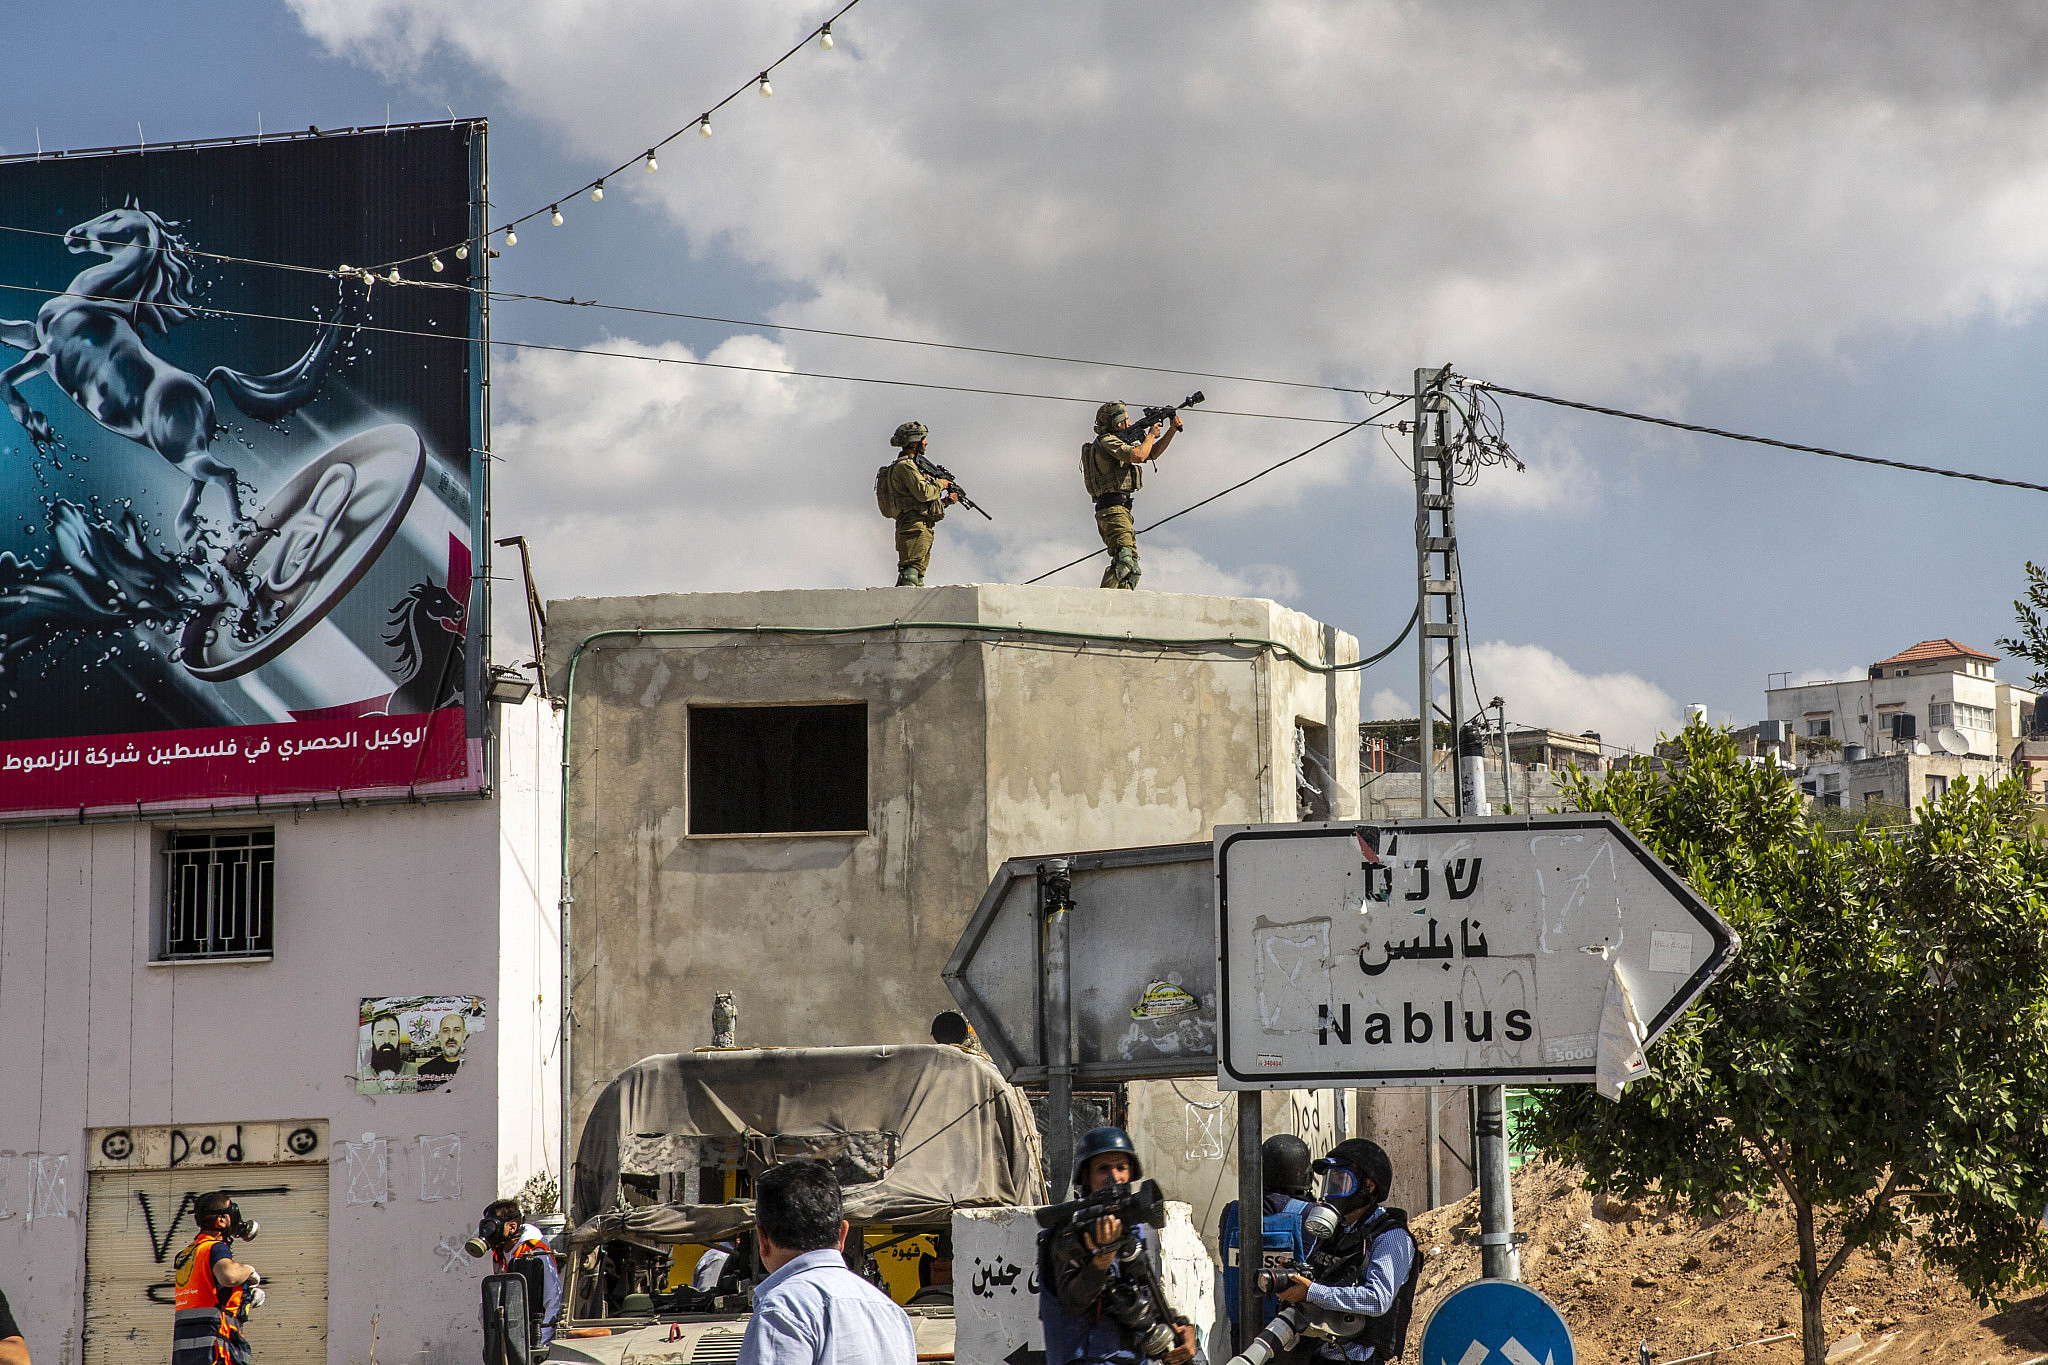 Israeli soldiers are seen on a rooftop during a protest against the closure of the Nablus area, Deir Sharaf, west of Nablus, occupied West Bank, October 20, 2022.